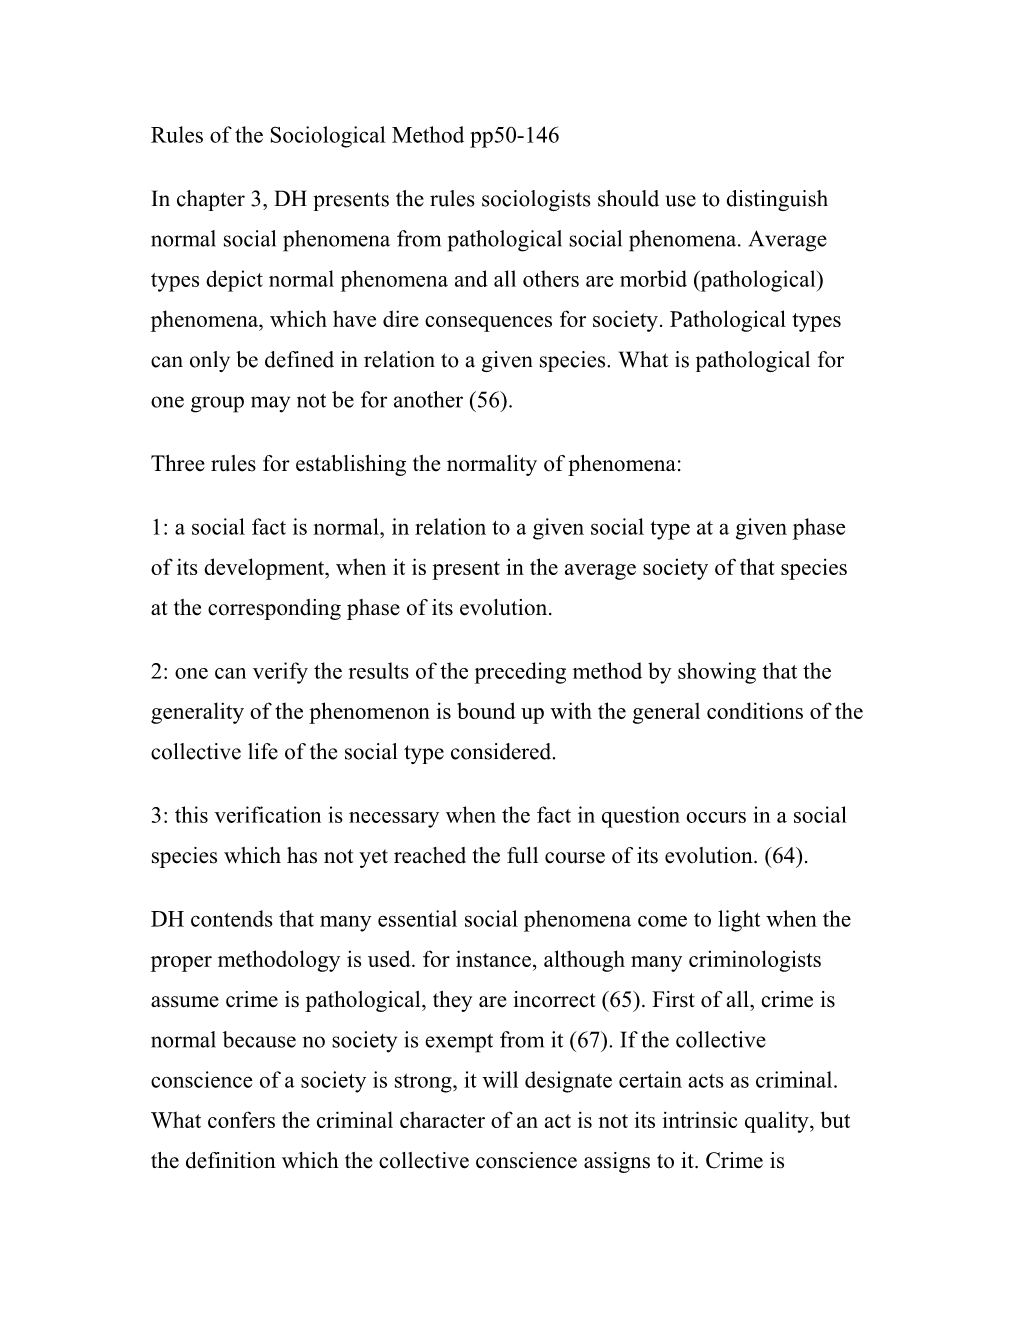 Rules of the Sociological Method Pp50-146